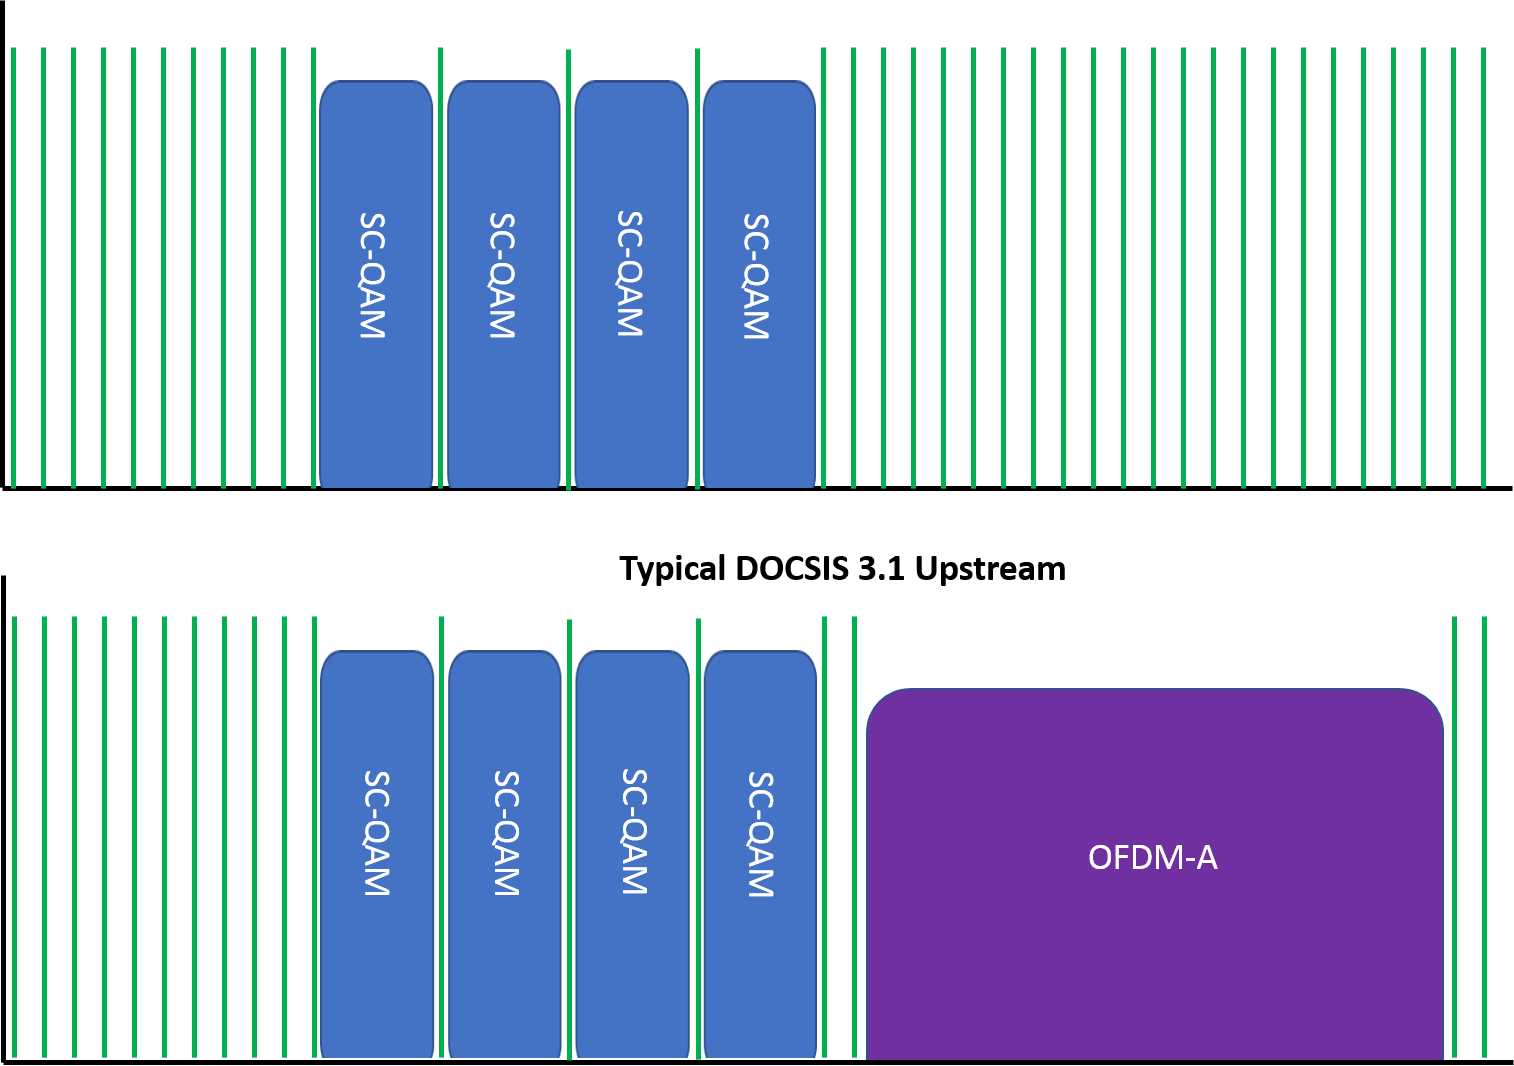 Upstream or return sweep carrier placement before DOCSIS 3.1 OFDM-A implementation